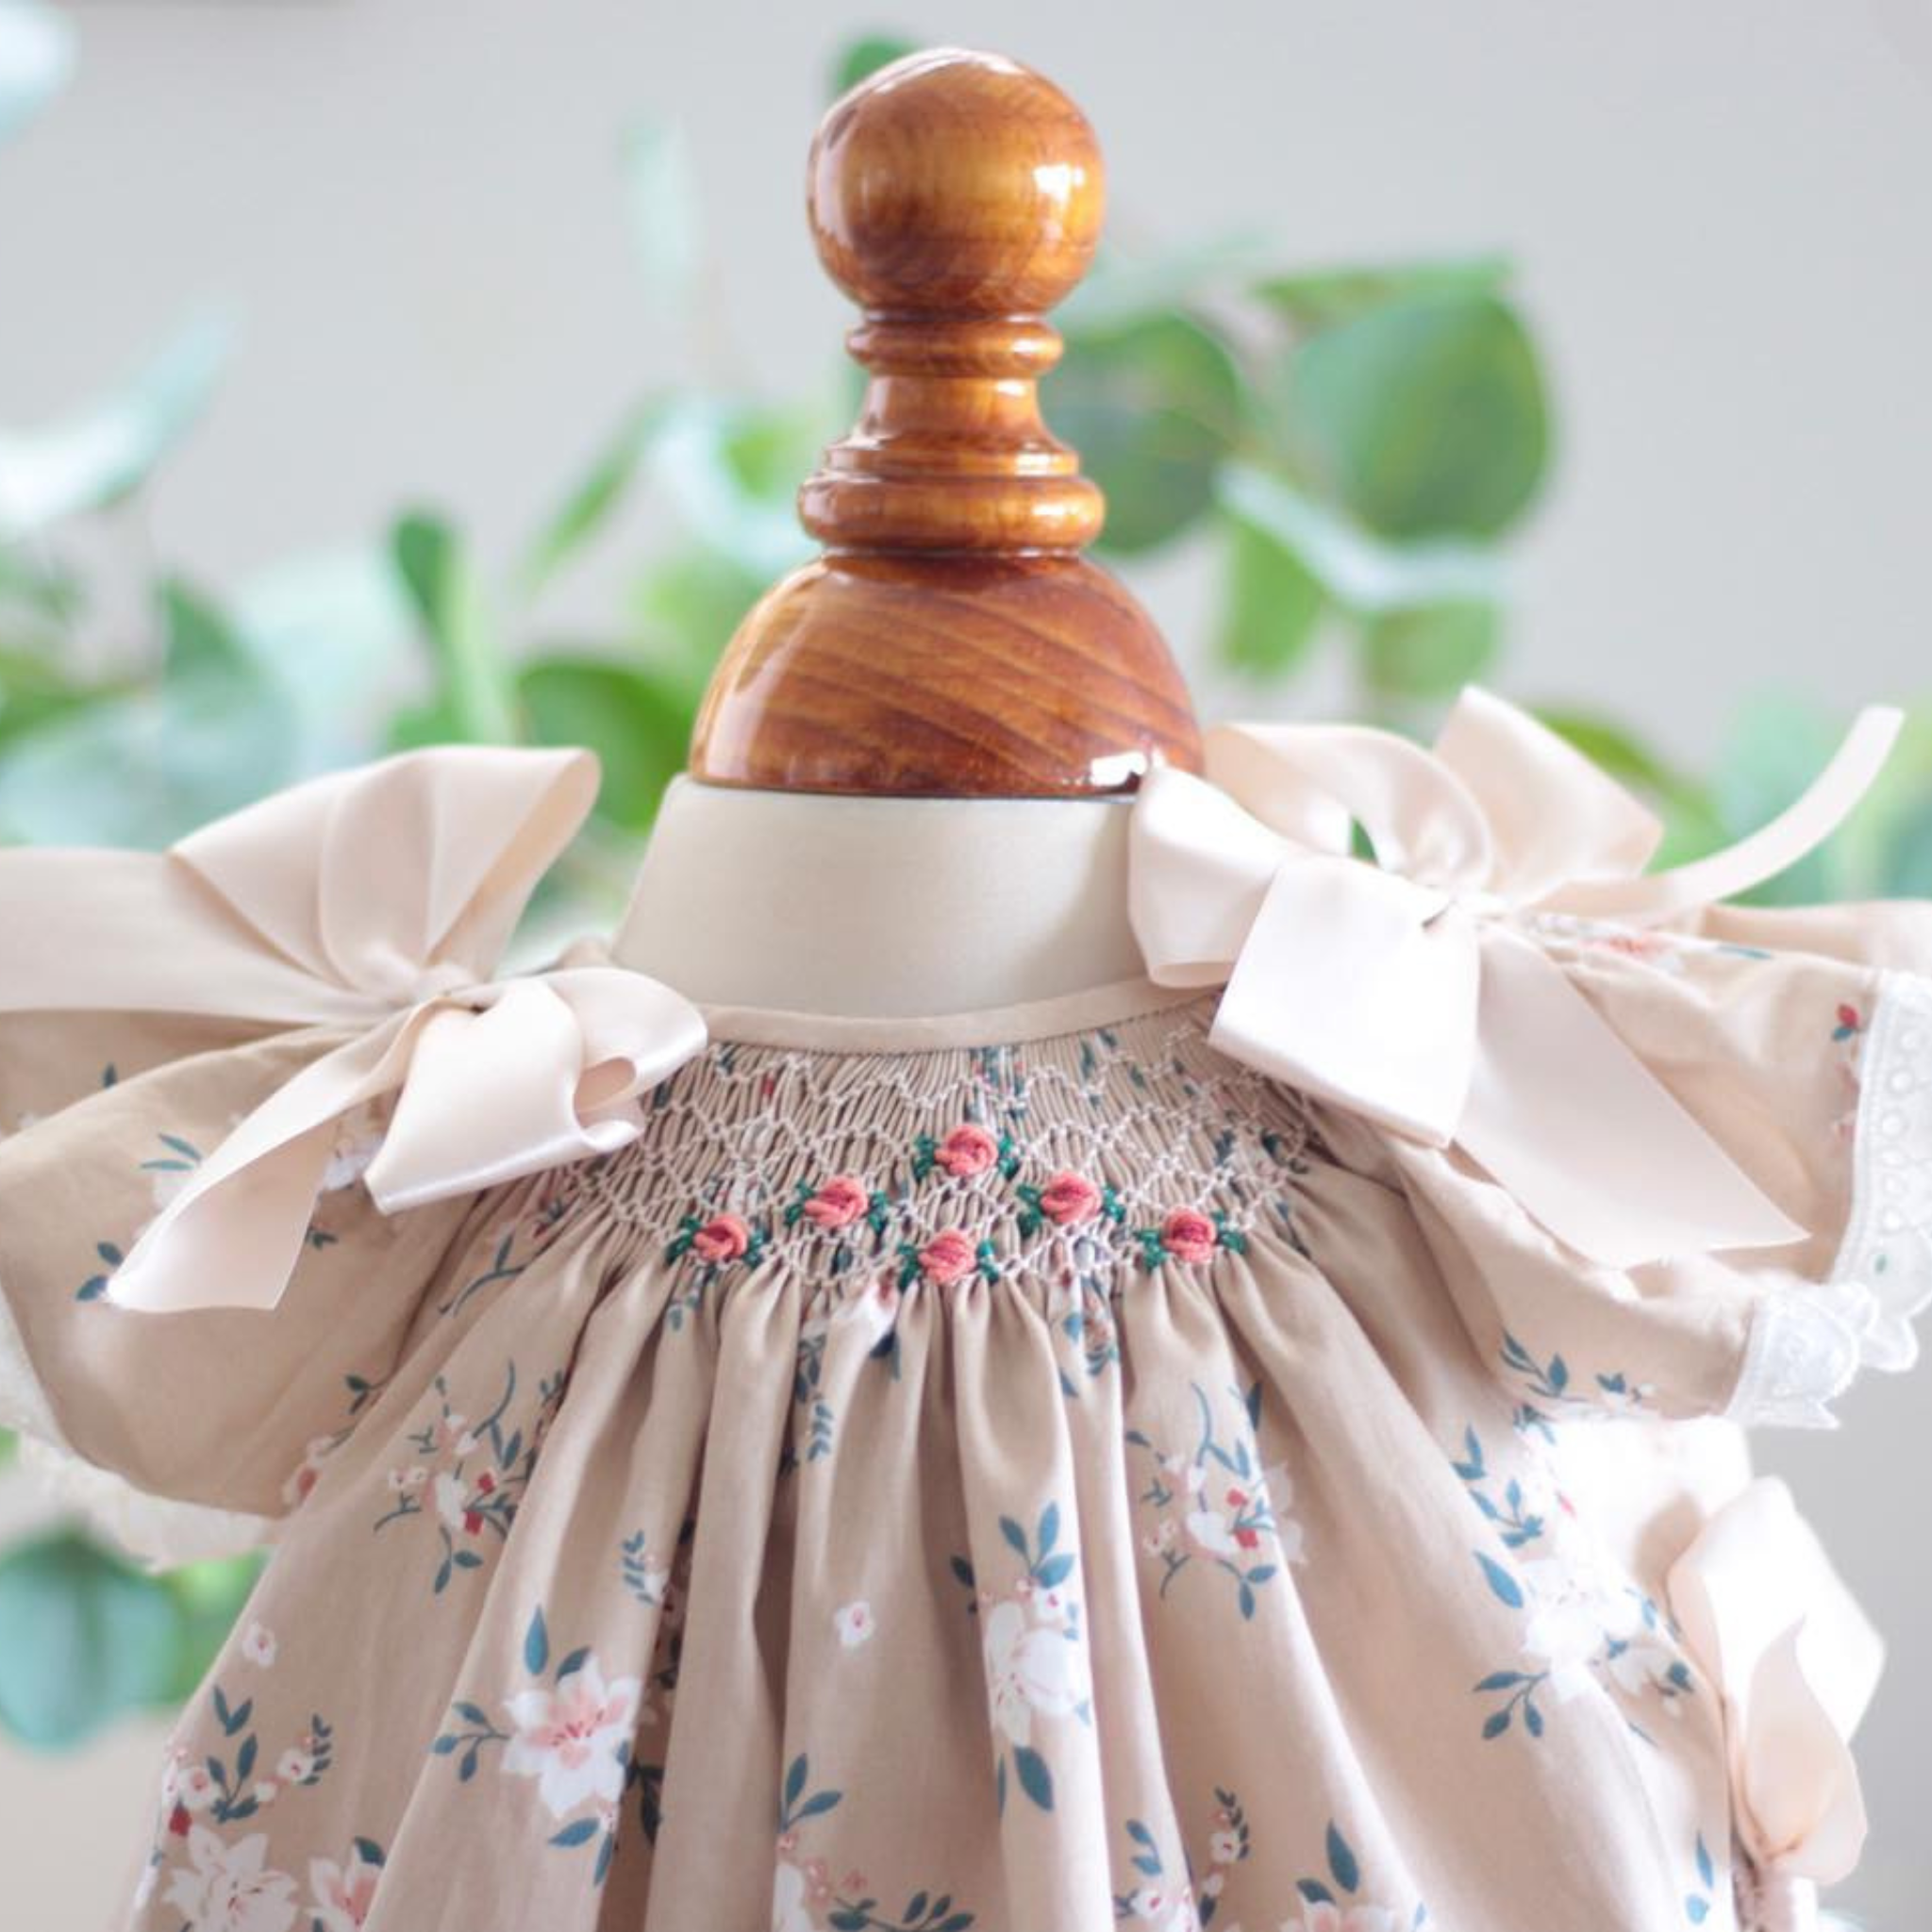 Handmade Embroidered Dress with Flower Print